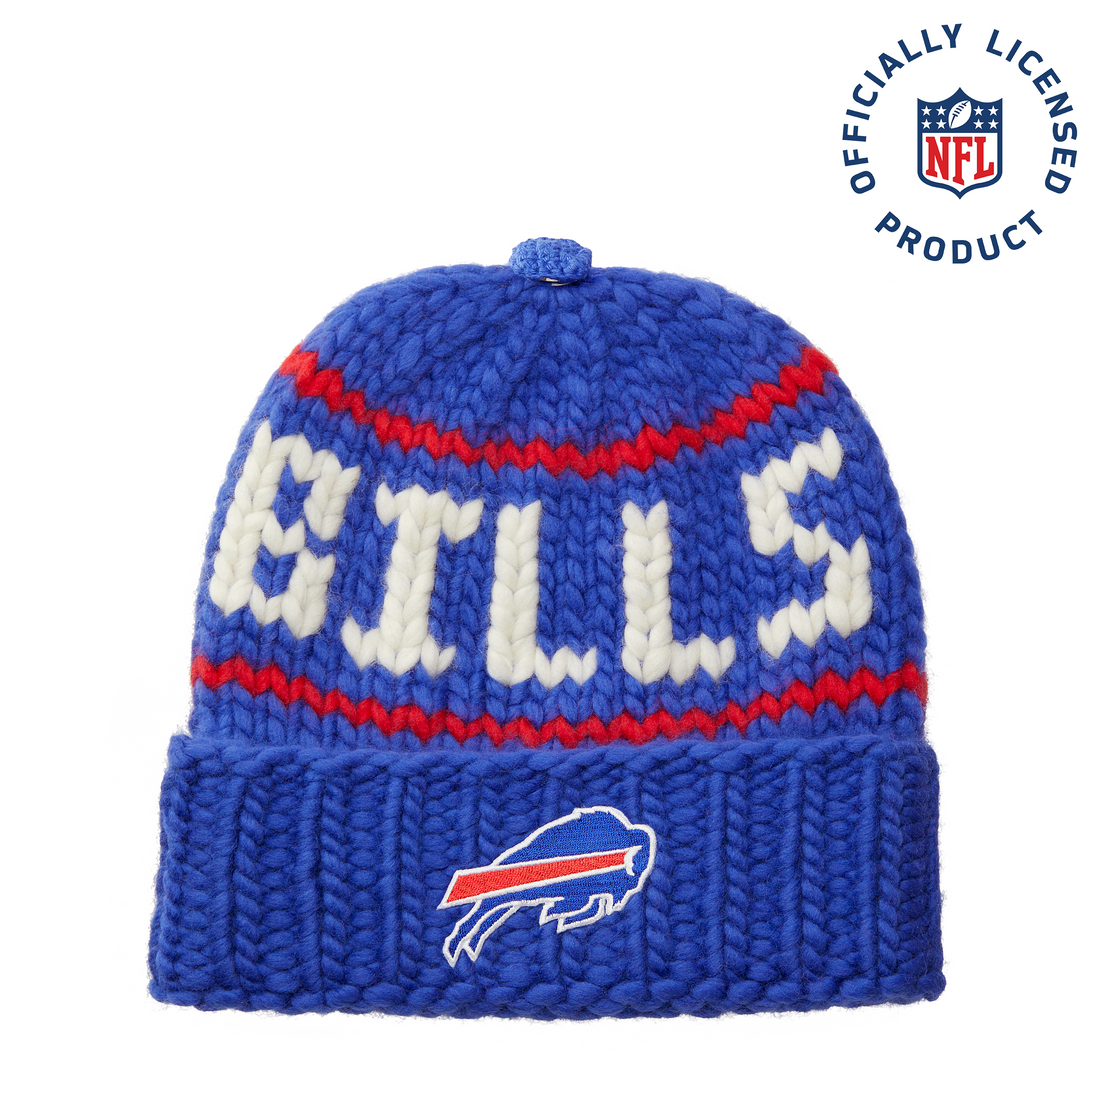 The Bills NFL Beanie with Snap Cover